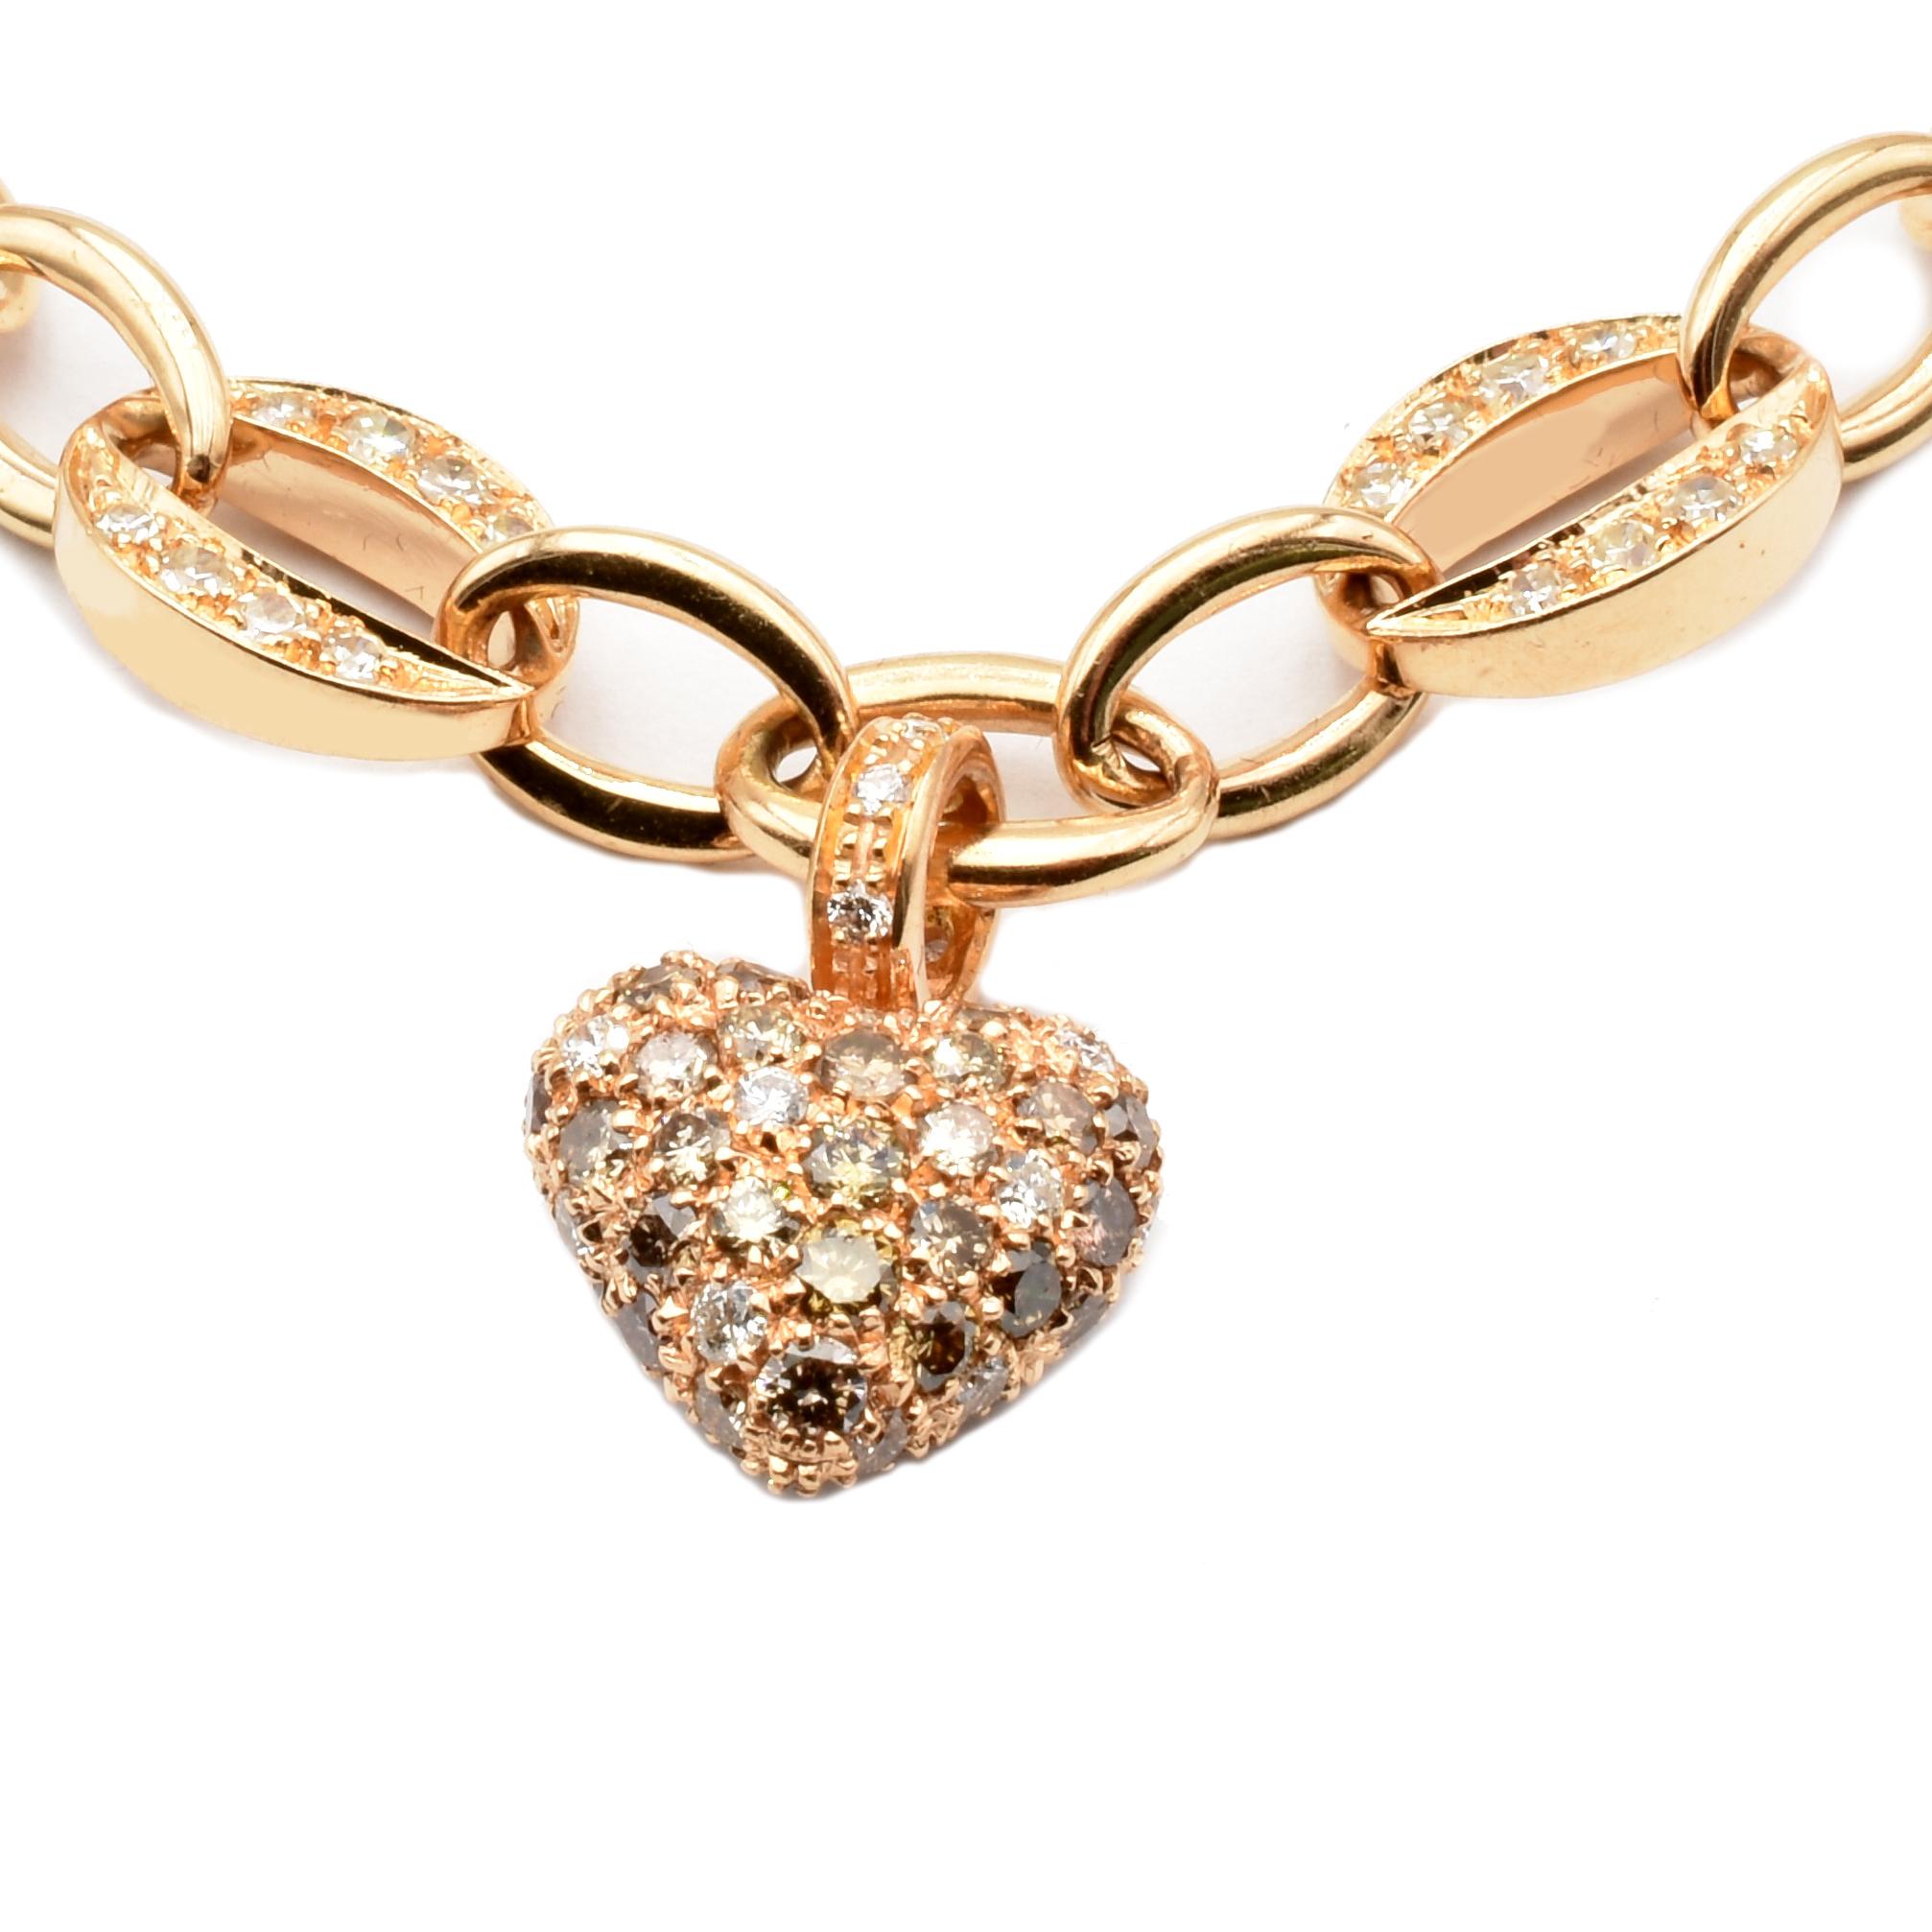 Women's White and Champagne Diamonds Heart Charm Bracelet Rose Gold Made in Italy